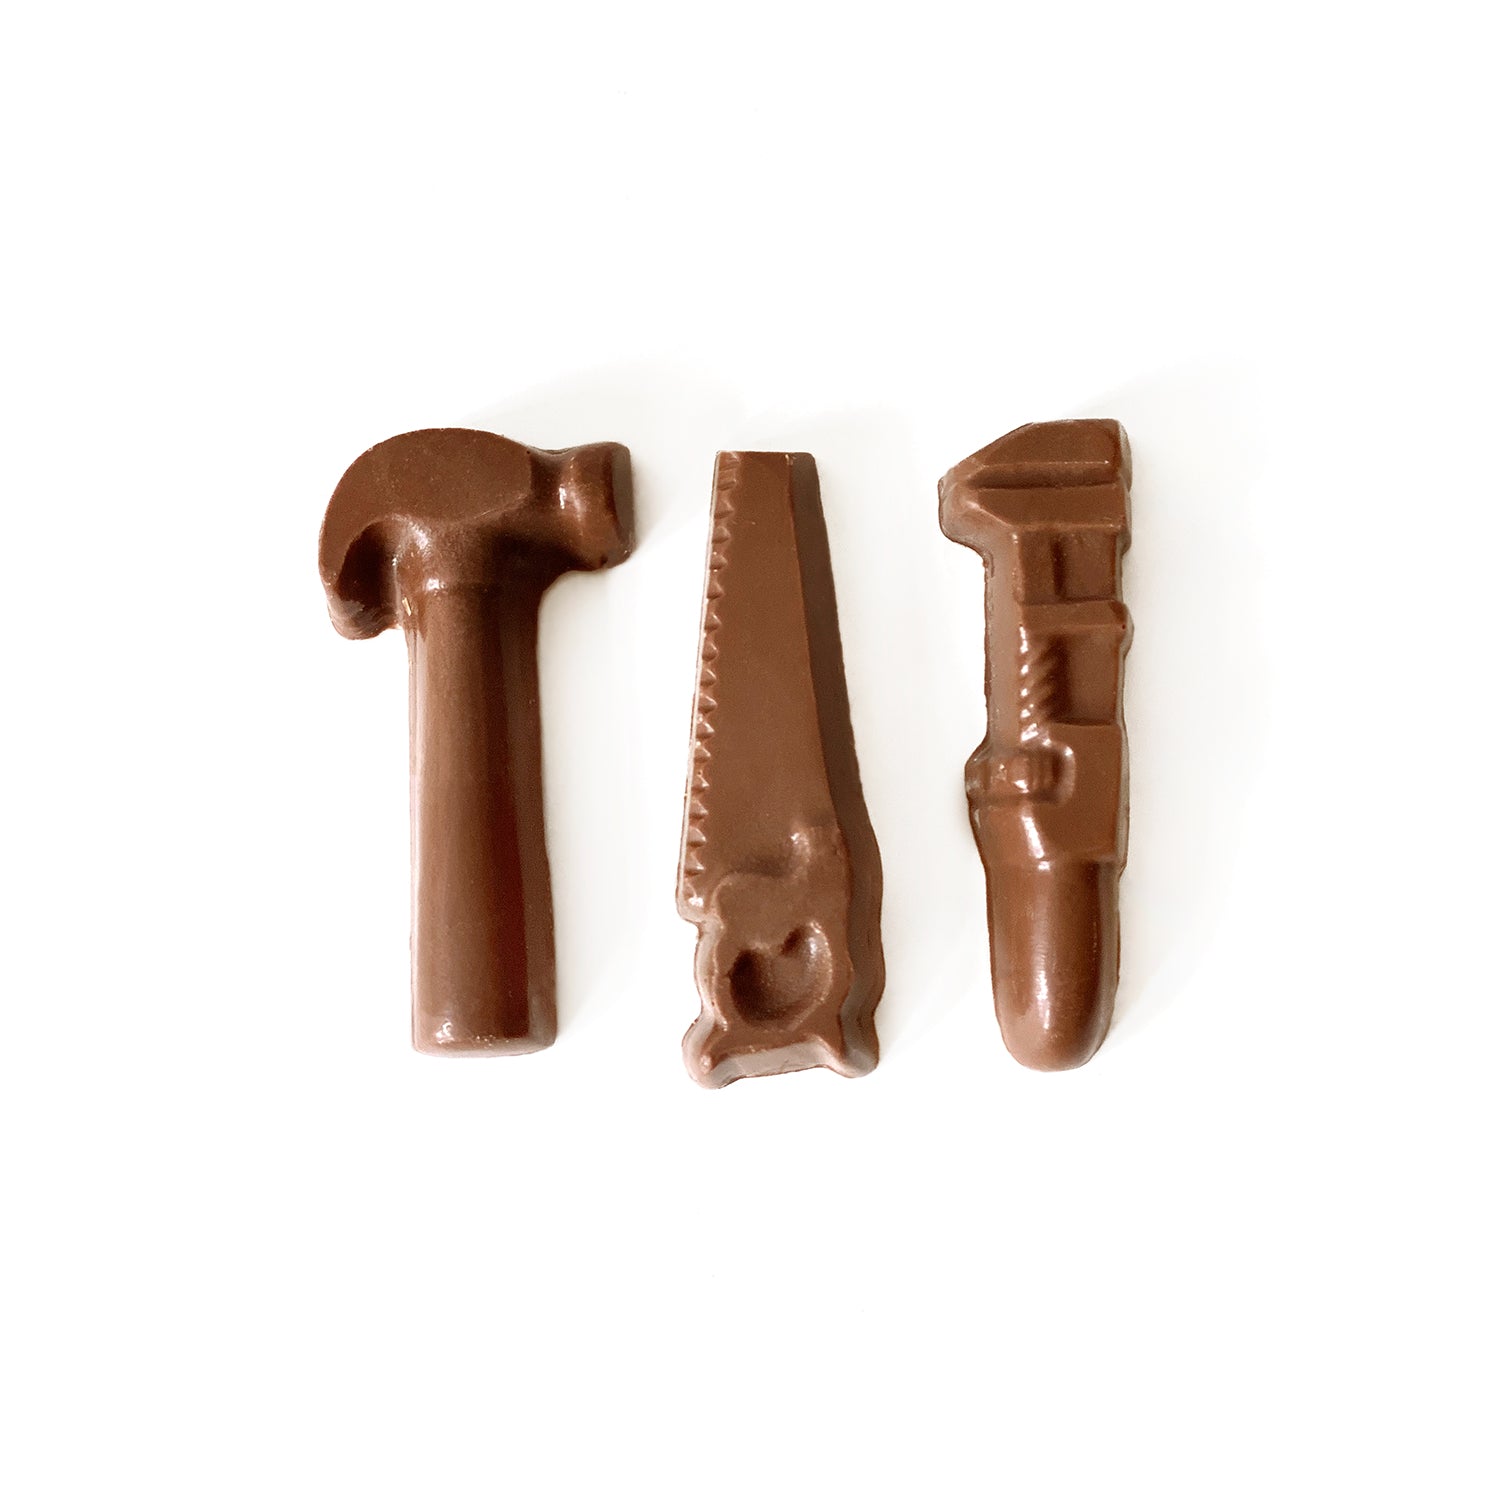 A milk chocolate tool set for Father's Day.